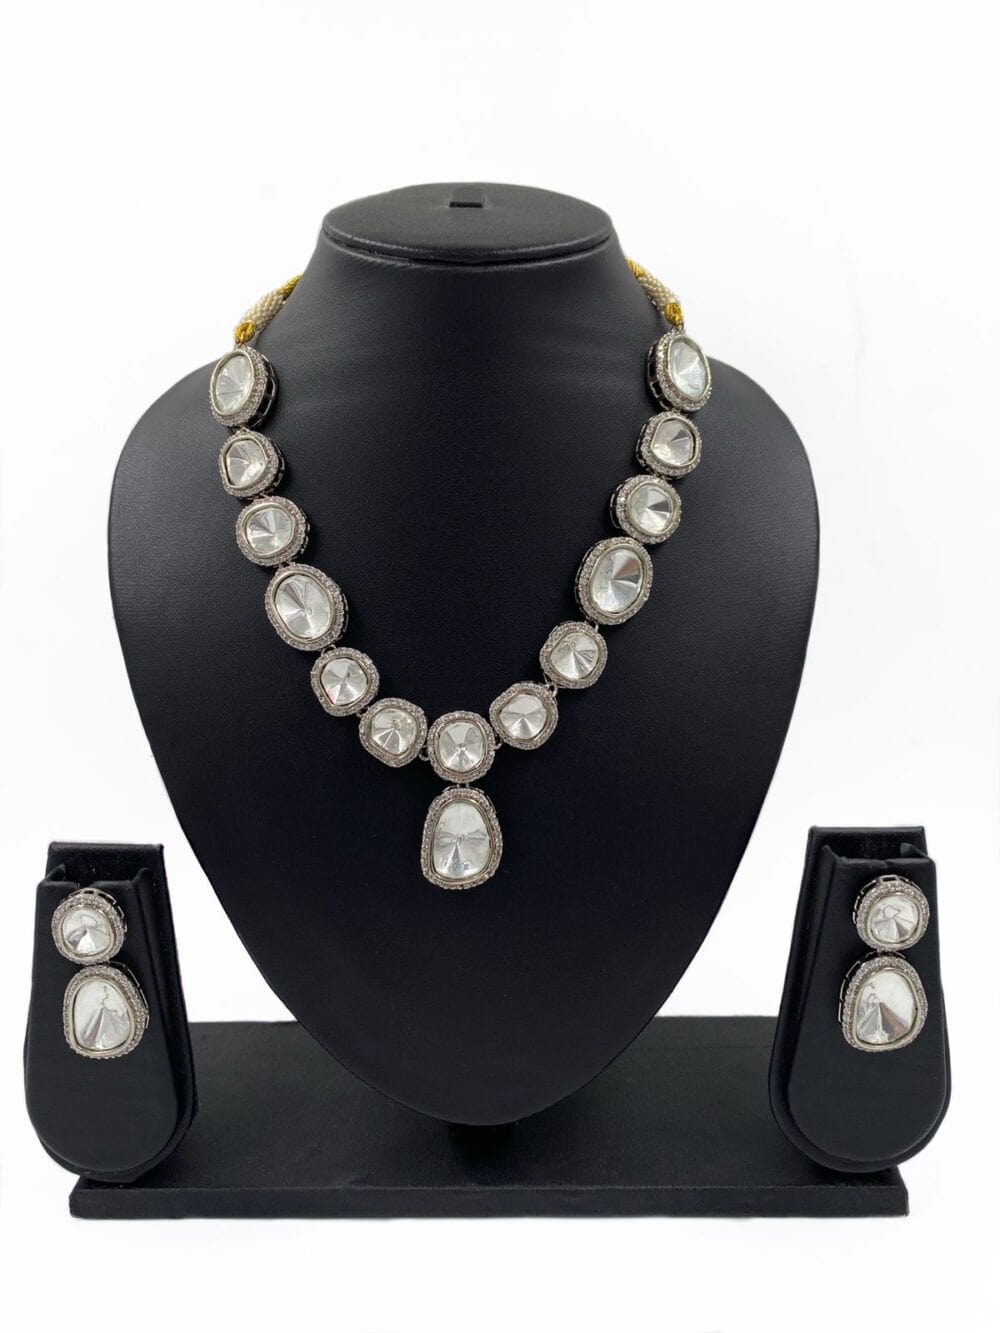 Silver Plated Polki Kundan Necklace For Weddings By Gehna Shop Victorian Necklace Sets